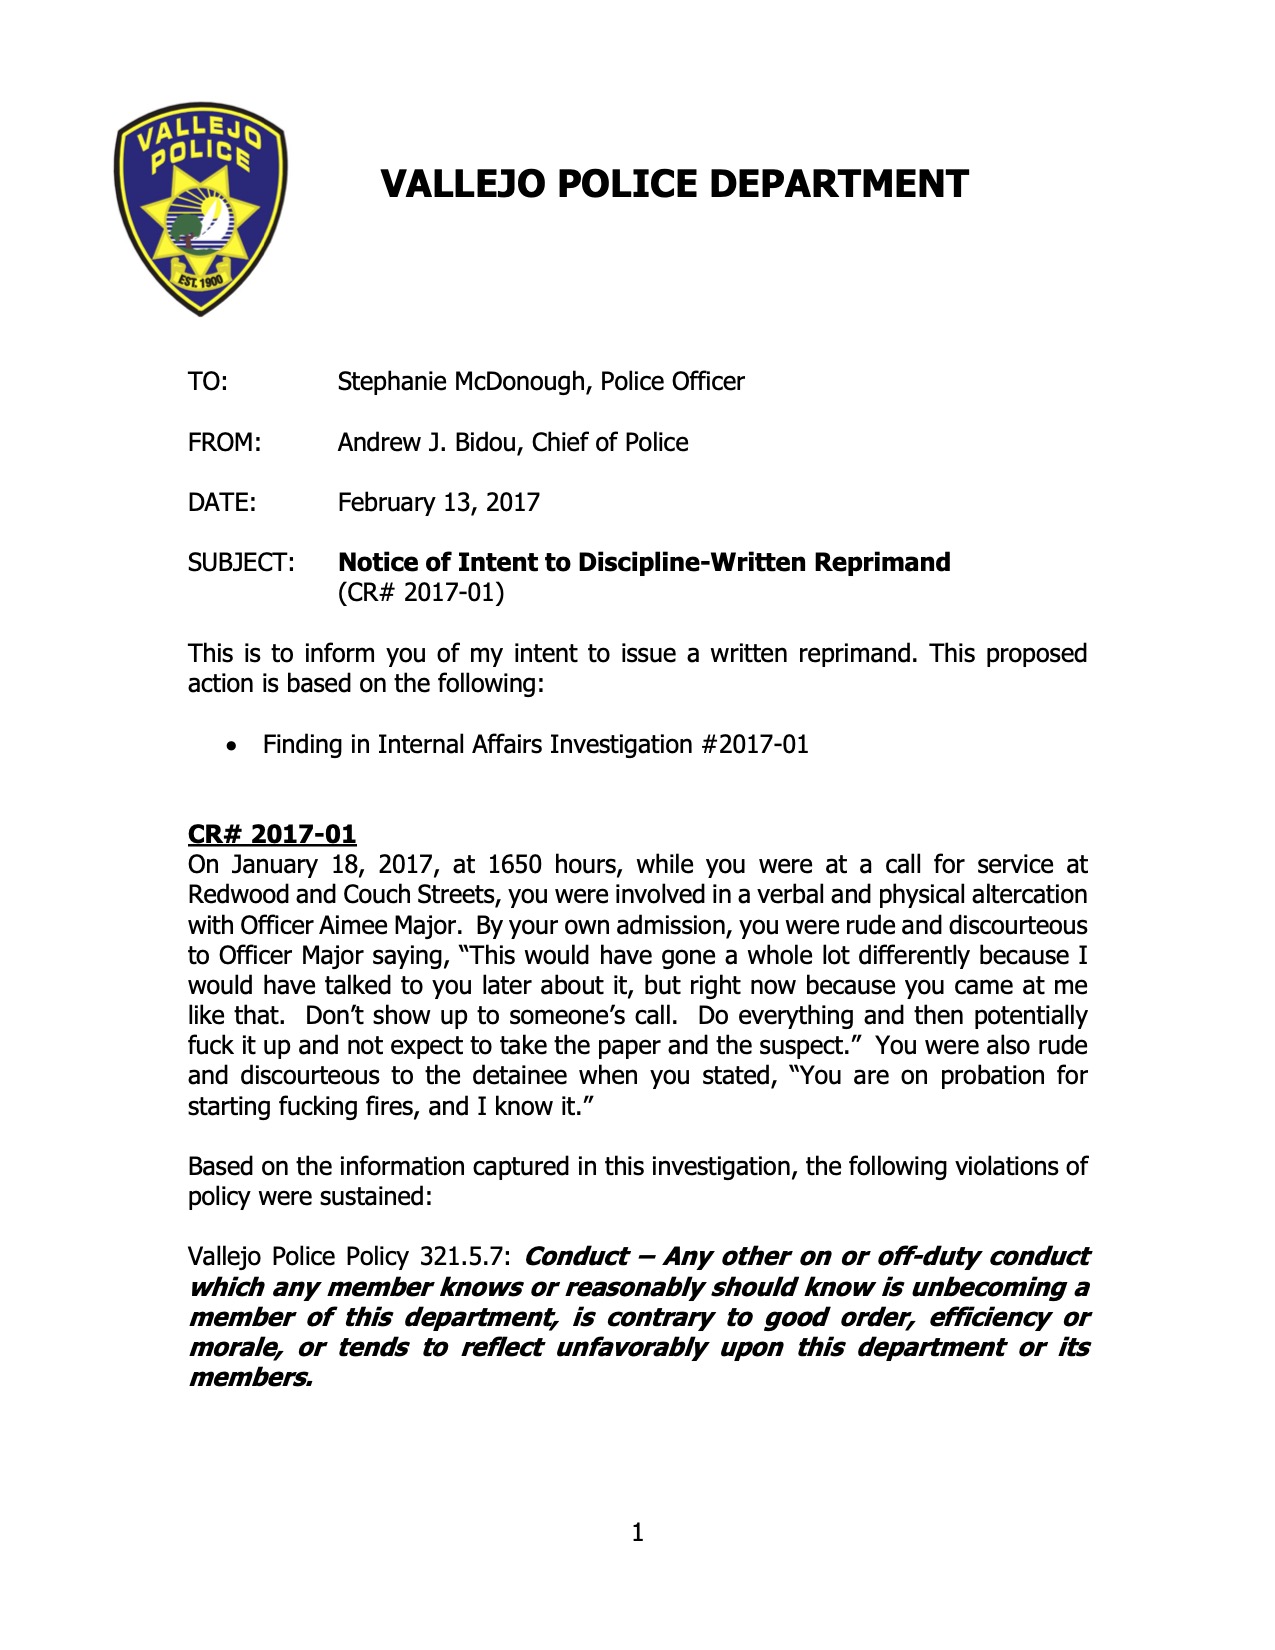 Image of a document titled "VALLEJO POLICE DEPARTMENT Memorandum," addressed to Officer Stephanie McDonough. It is a "Notice of Intent to Discipline-Written Reprimand" signed by the Chief of Police, dated February 13, 2017, also citing a violation of police policies. The full text reads: TO: Stephanie McDonough, Police Officer FROM: Andrew J. Bidou, Chief of Police DATE: February 13, 2017 SUBJECT: Notice of Intent to Discipline-Written Reprimand (CR# 2017-01) This is to inform you of my intent to issue a written reprimand. This proposed action is based on the following: • Finding in Internal Affairs Investigation #2017-01 CR# 2017-01 On January 18, 2017, at 1650 hours, while you were at a call for service at Redwood and Couch Streets, you were involved in a verbal and physical altercation with Officer Aimee Major. By your own admission, you were rude and discourteous to Officer Major saying, “This would have gone a whole lot differently because I would have talked to you later about it, but right now because you came at me like that. Don’t show up to someone’s call. Do everything and then potentially fuck it up and not expect to take the paper and the suspect.” You were also rude and discourteous to the detainee when you stated, “You are on probation for starting fucking fires, and I know it.” Based on the information captured in this investigation, the following violations of policy were sustained: Vallejo Police Policy 321.5.7: Conduct – Any other on or off-duty conduct which any member knows or reasonably should know is unbecoming a member of this department, is contrary to good order, efficiency or morale, or tends to reflect unfavorably upon this department or its members.